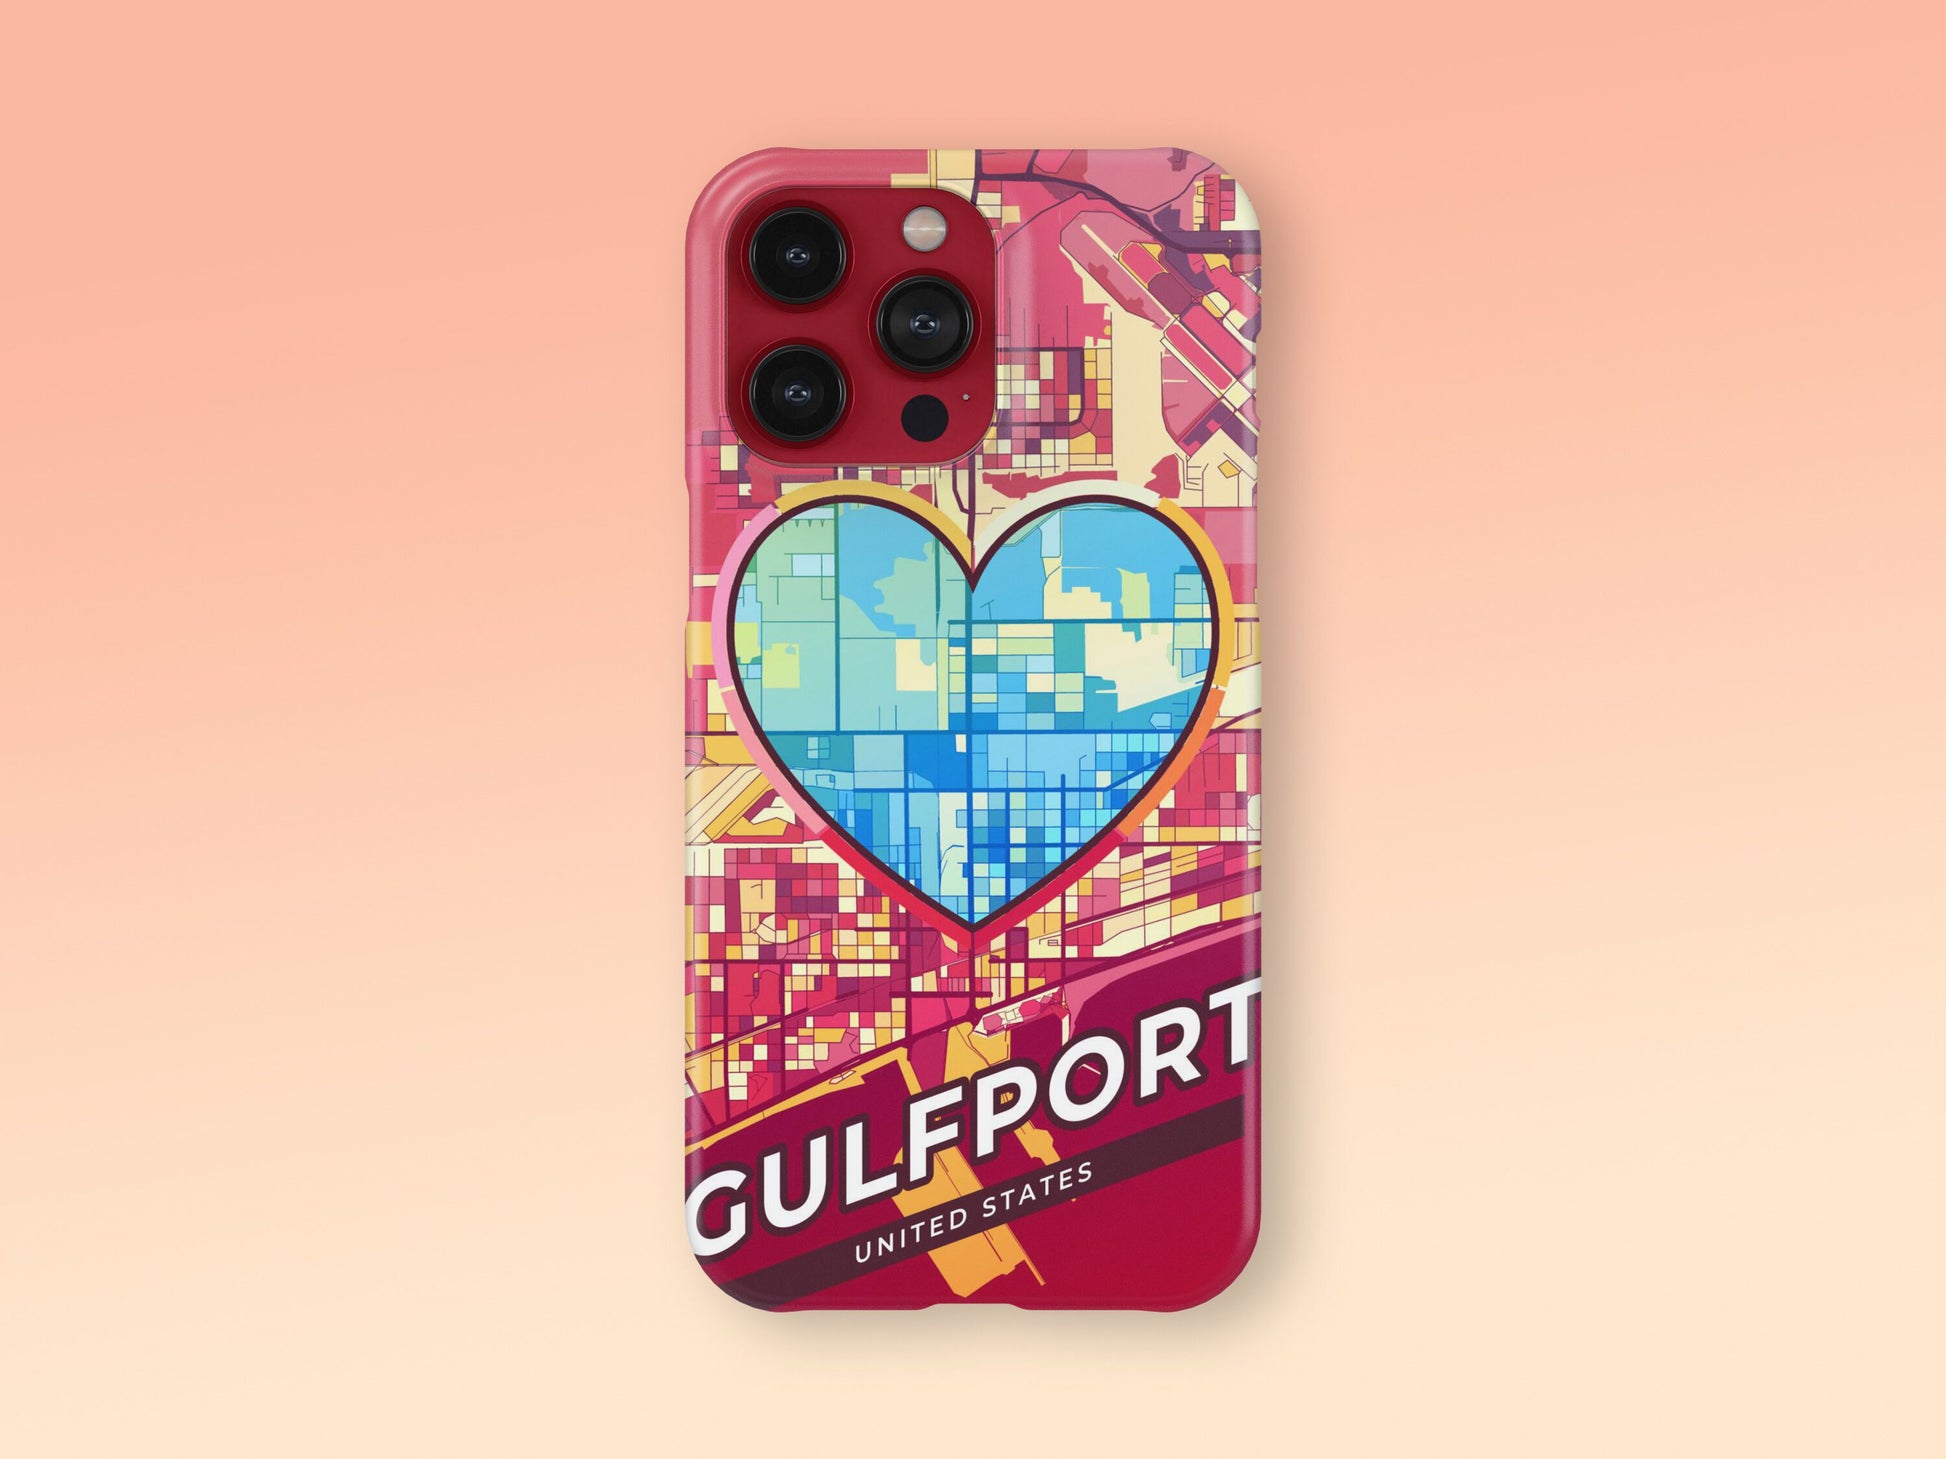 Gulfport Mississippi slim phone case with colorful icon. Birthday, wedding or housewarming gift. Couple match cases. 2